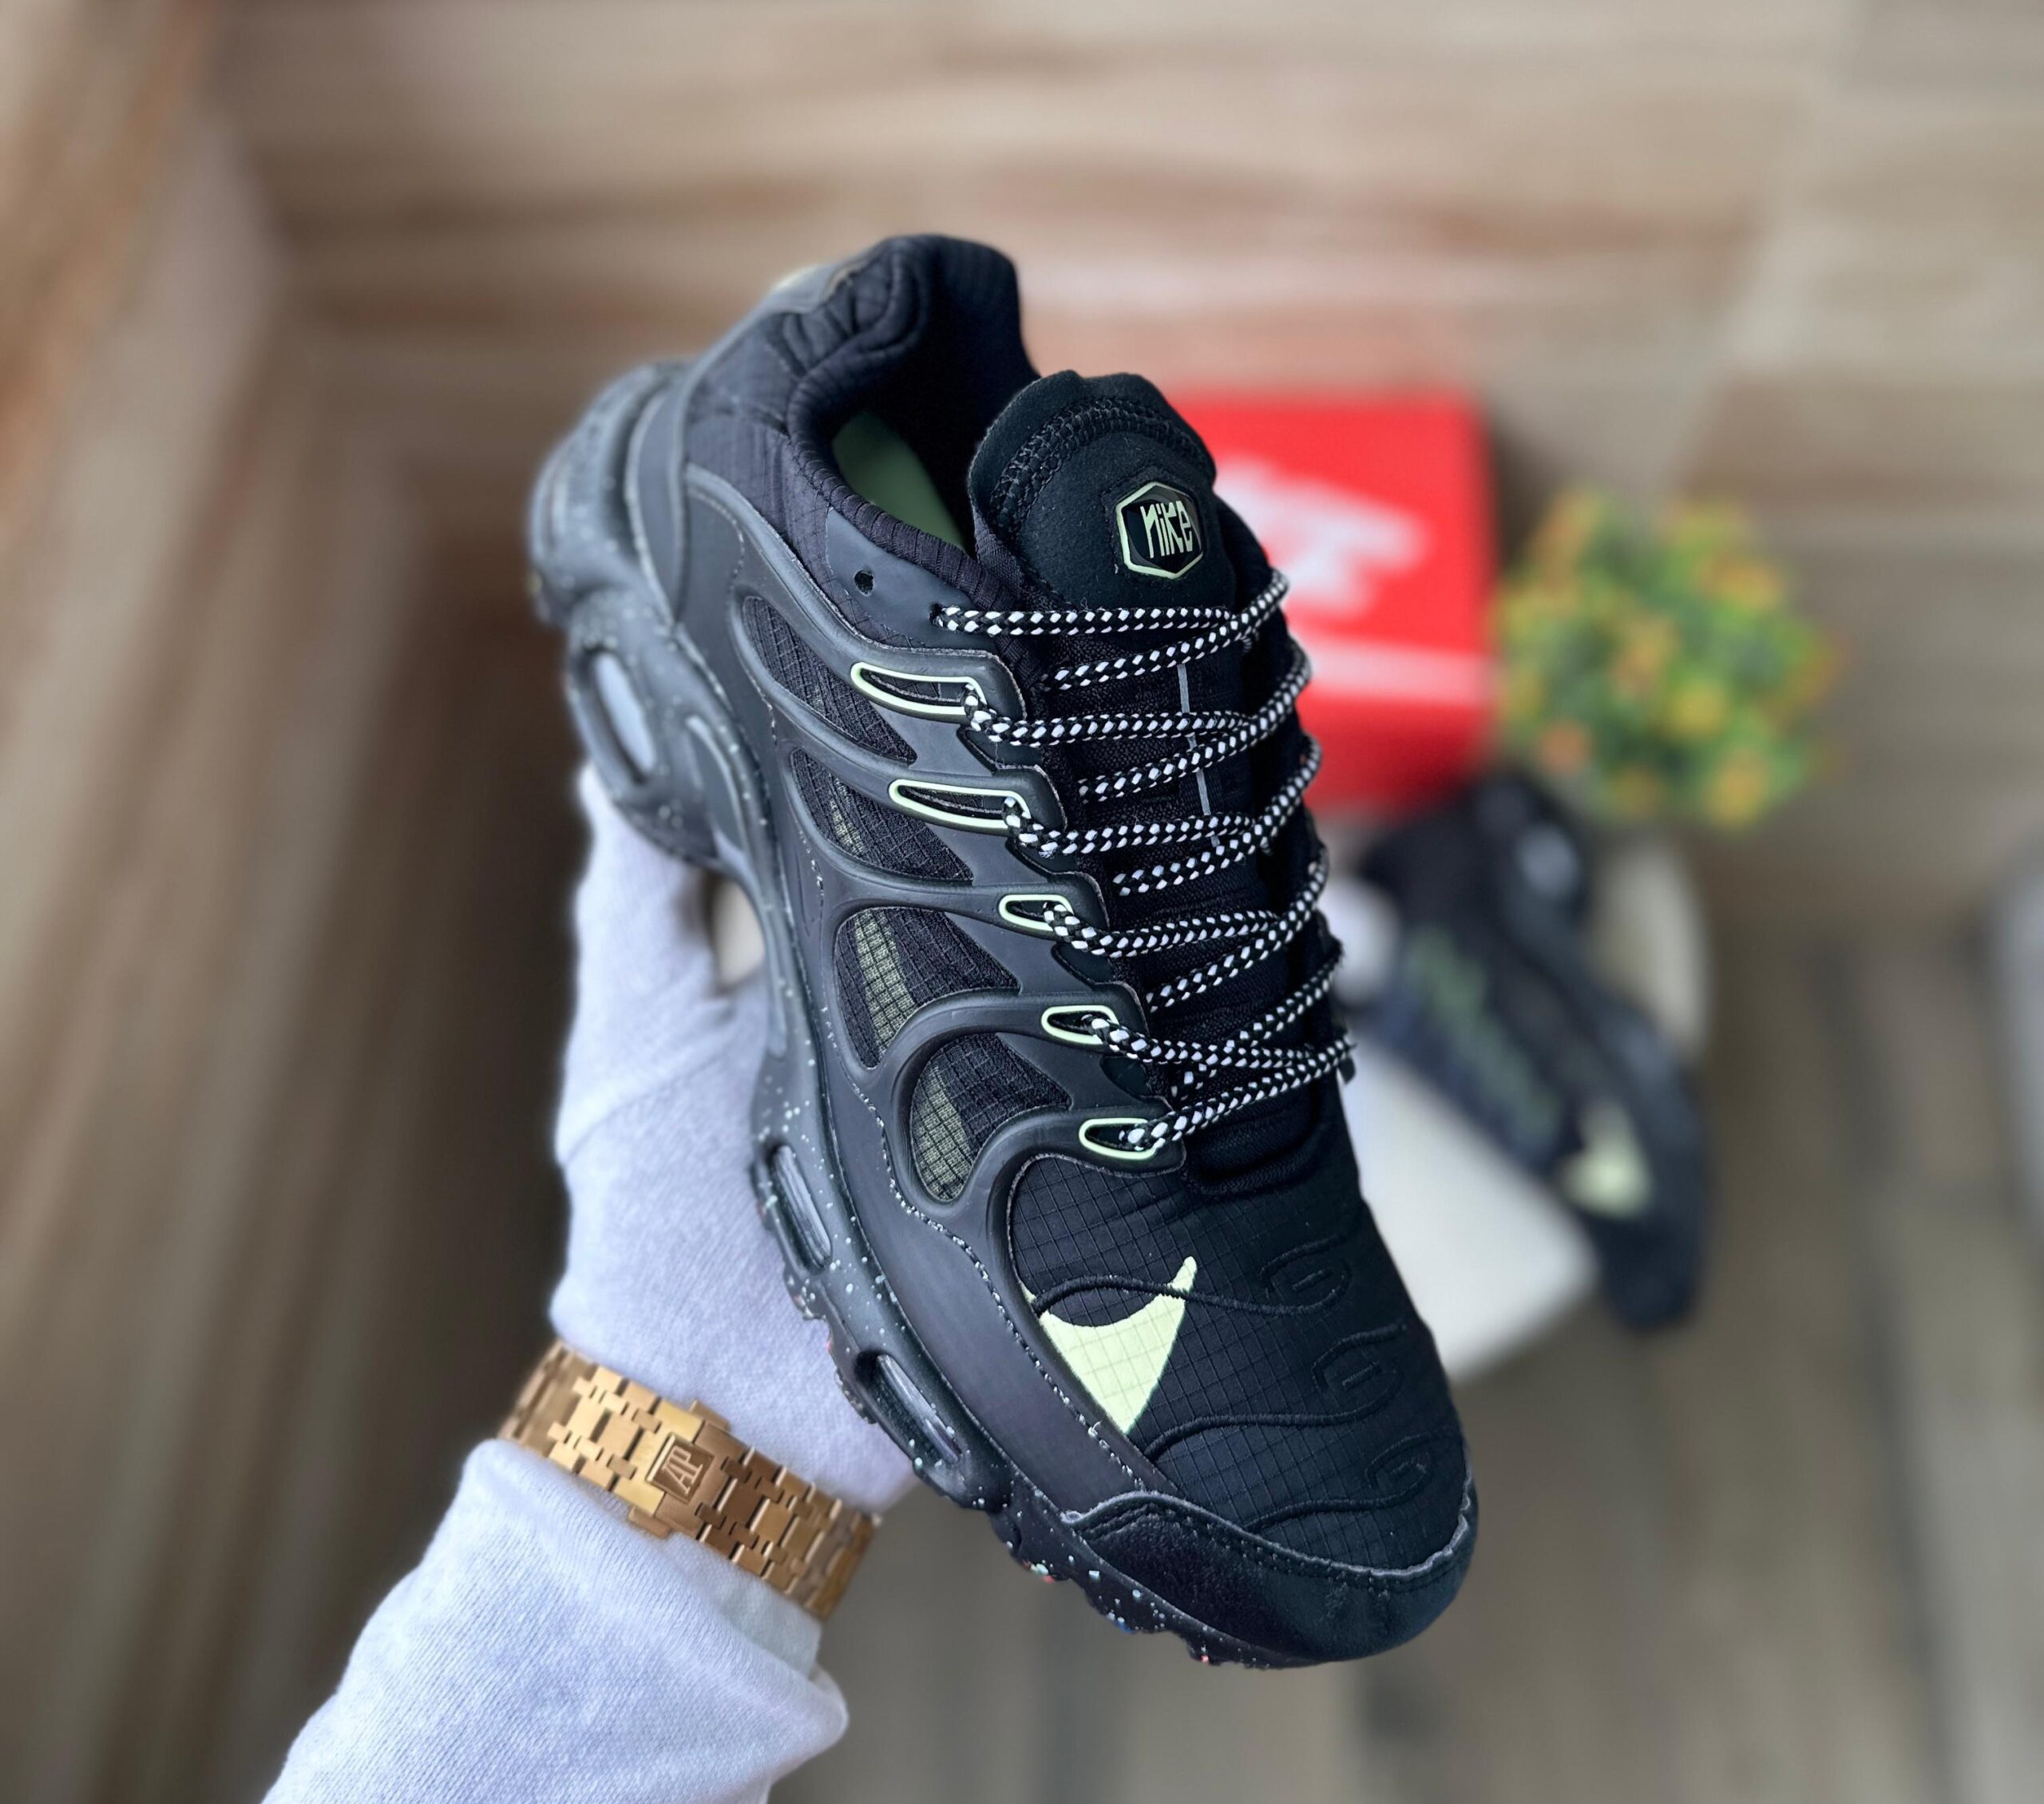 Airmax Plus Terascape Sneakers In Stock